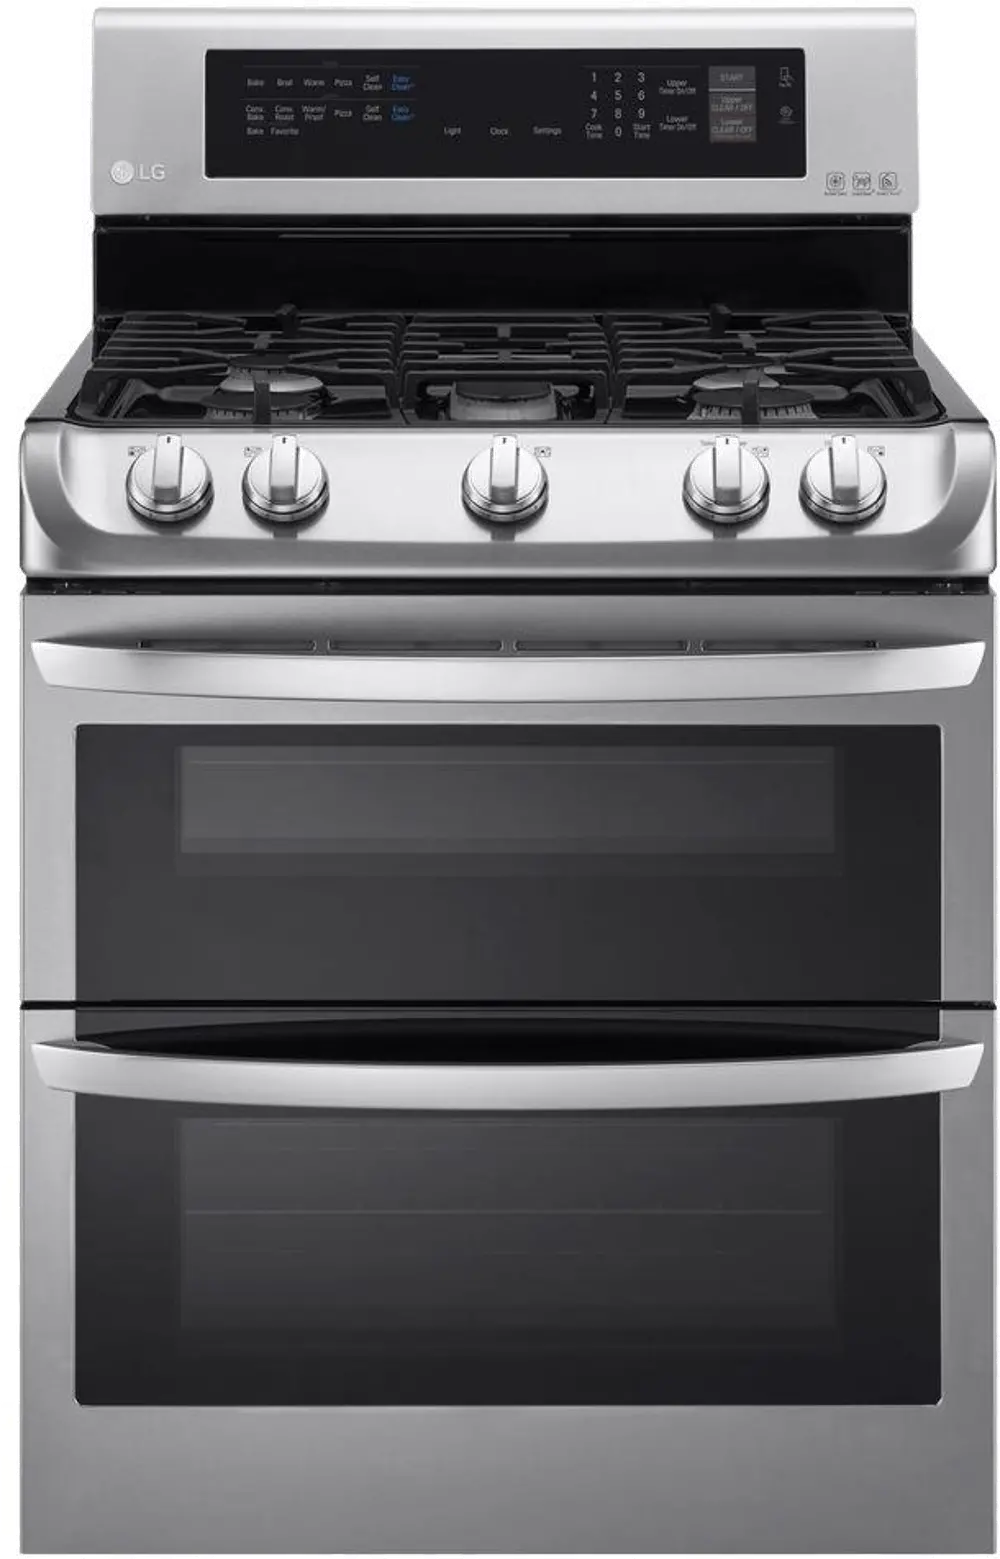 LDG4313ST LG 6.9 cu ft Double Oven Gas Range - Stainless Steel-1